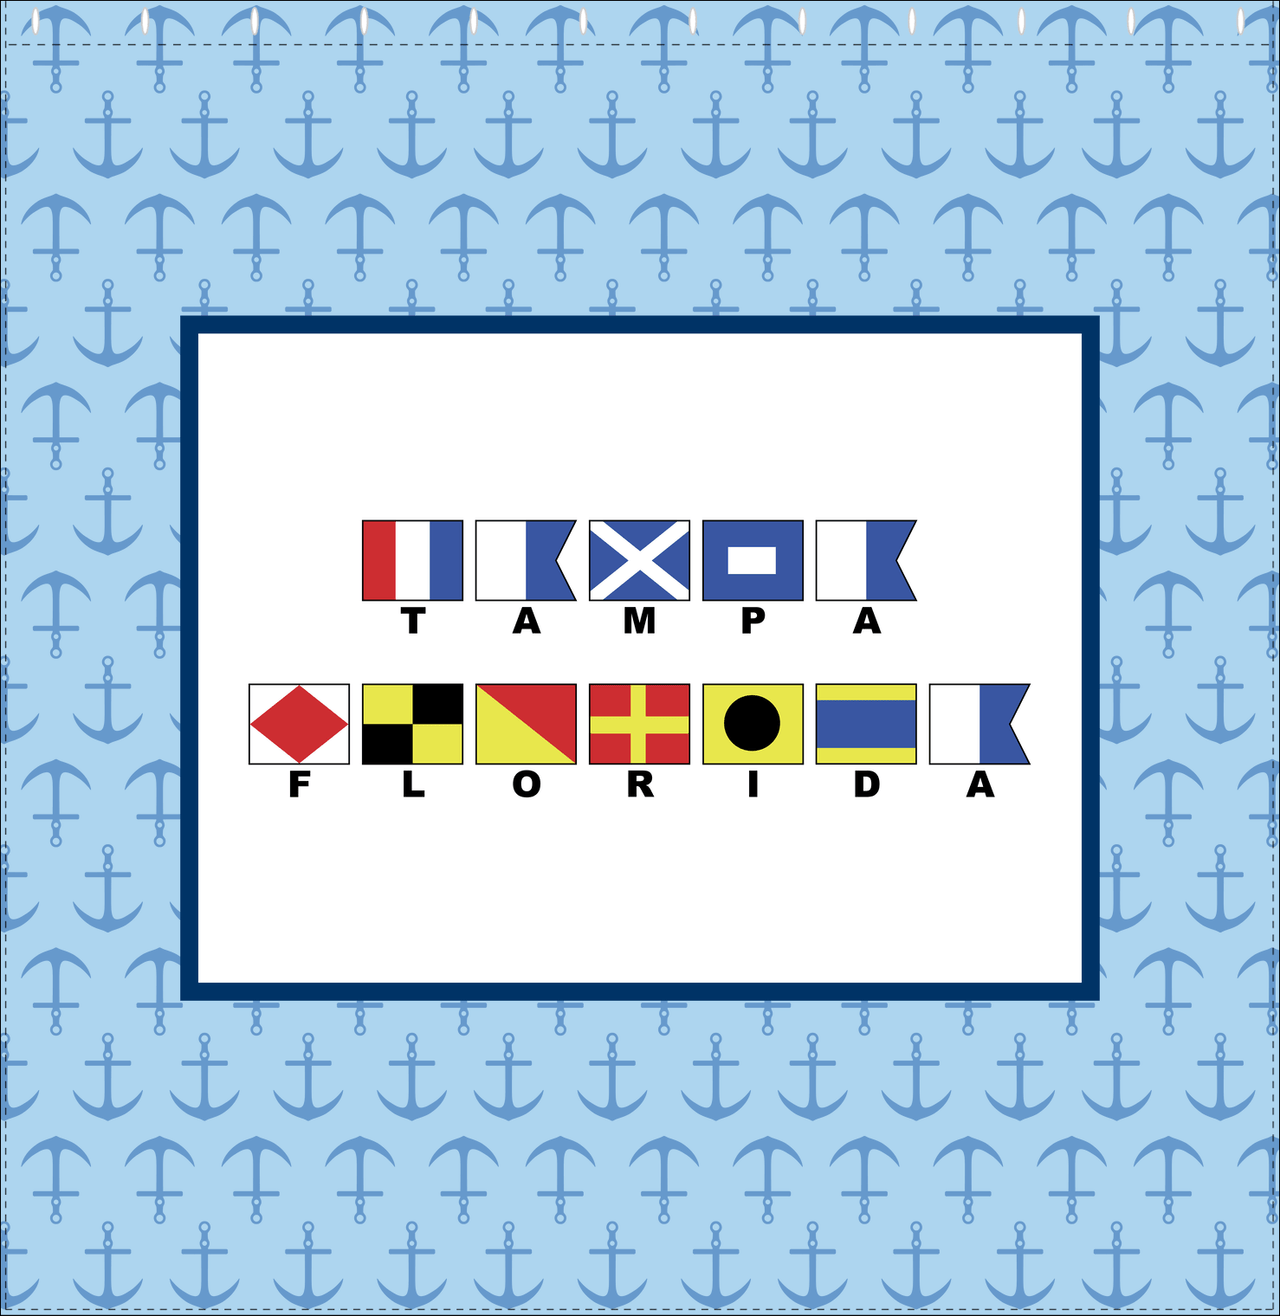 Personalized Nautical Flags Shower Curtain with Anchors - Blue and Navy - Flags with Small Letters - Decorate View